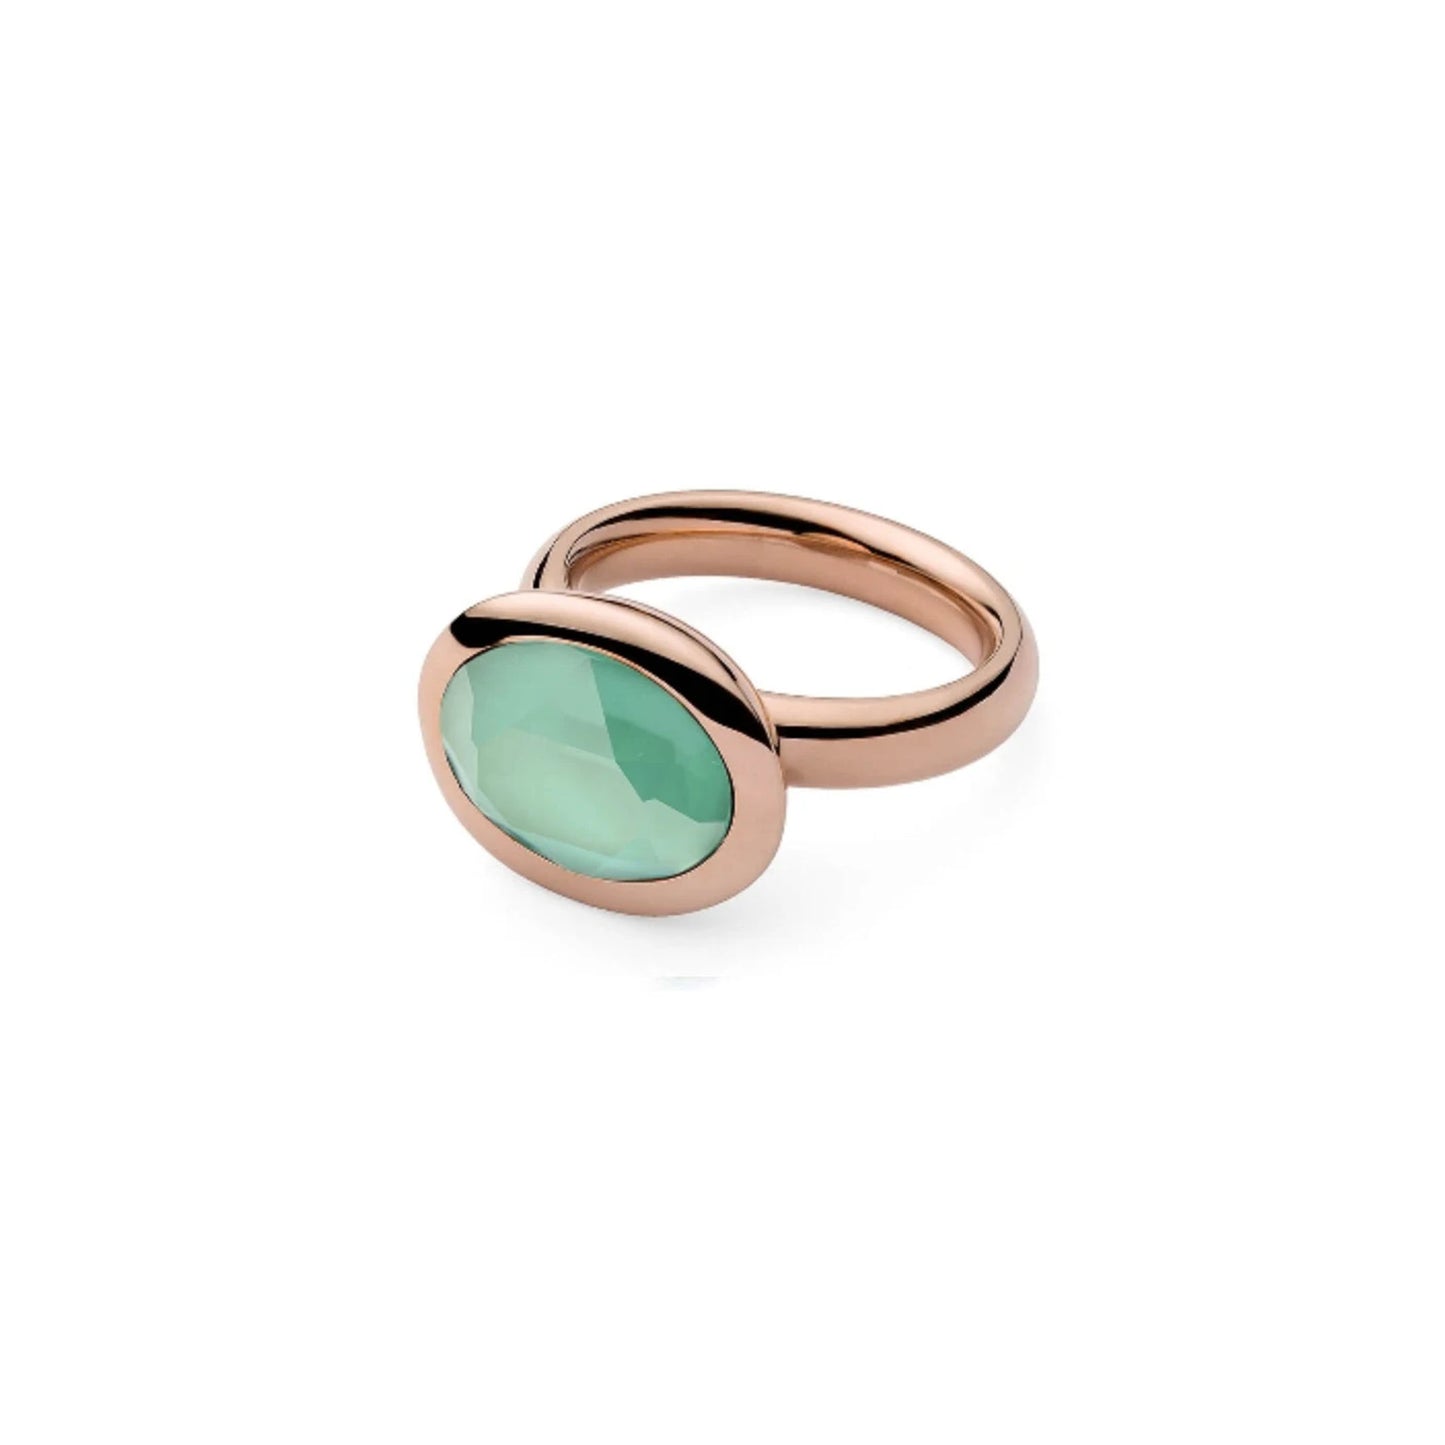 Tivola Ring in Rose Gold - Mint Green